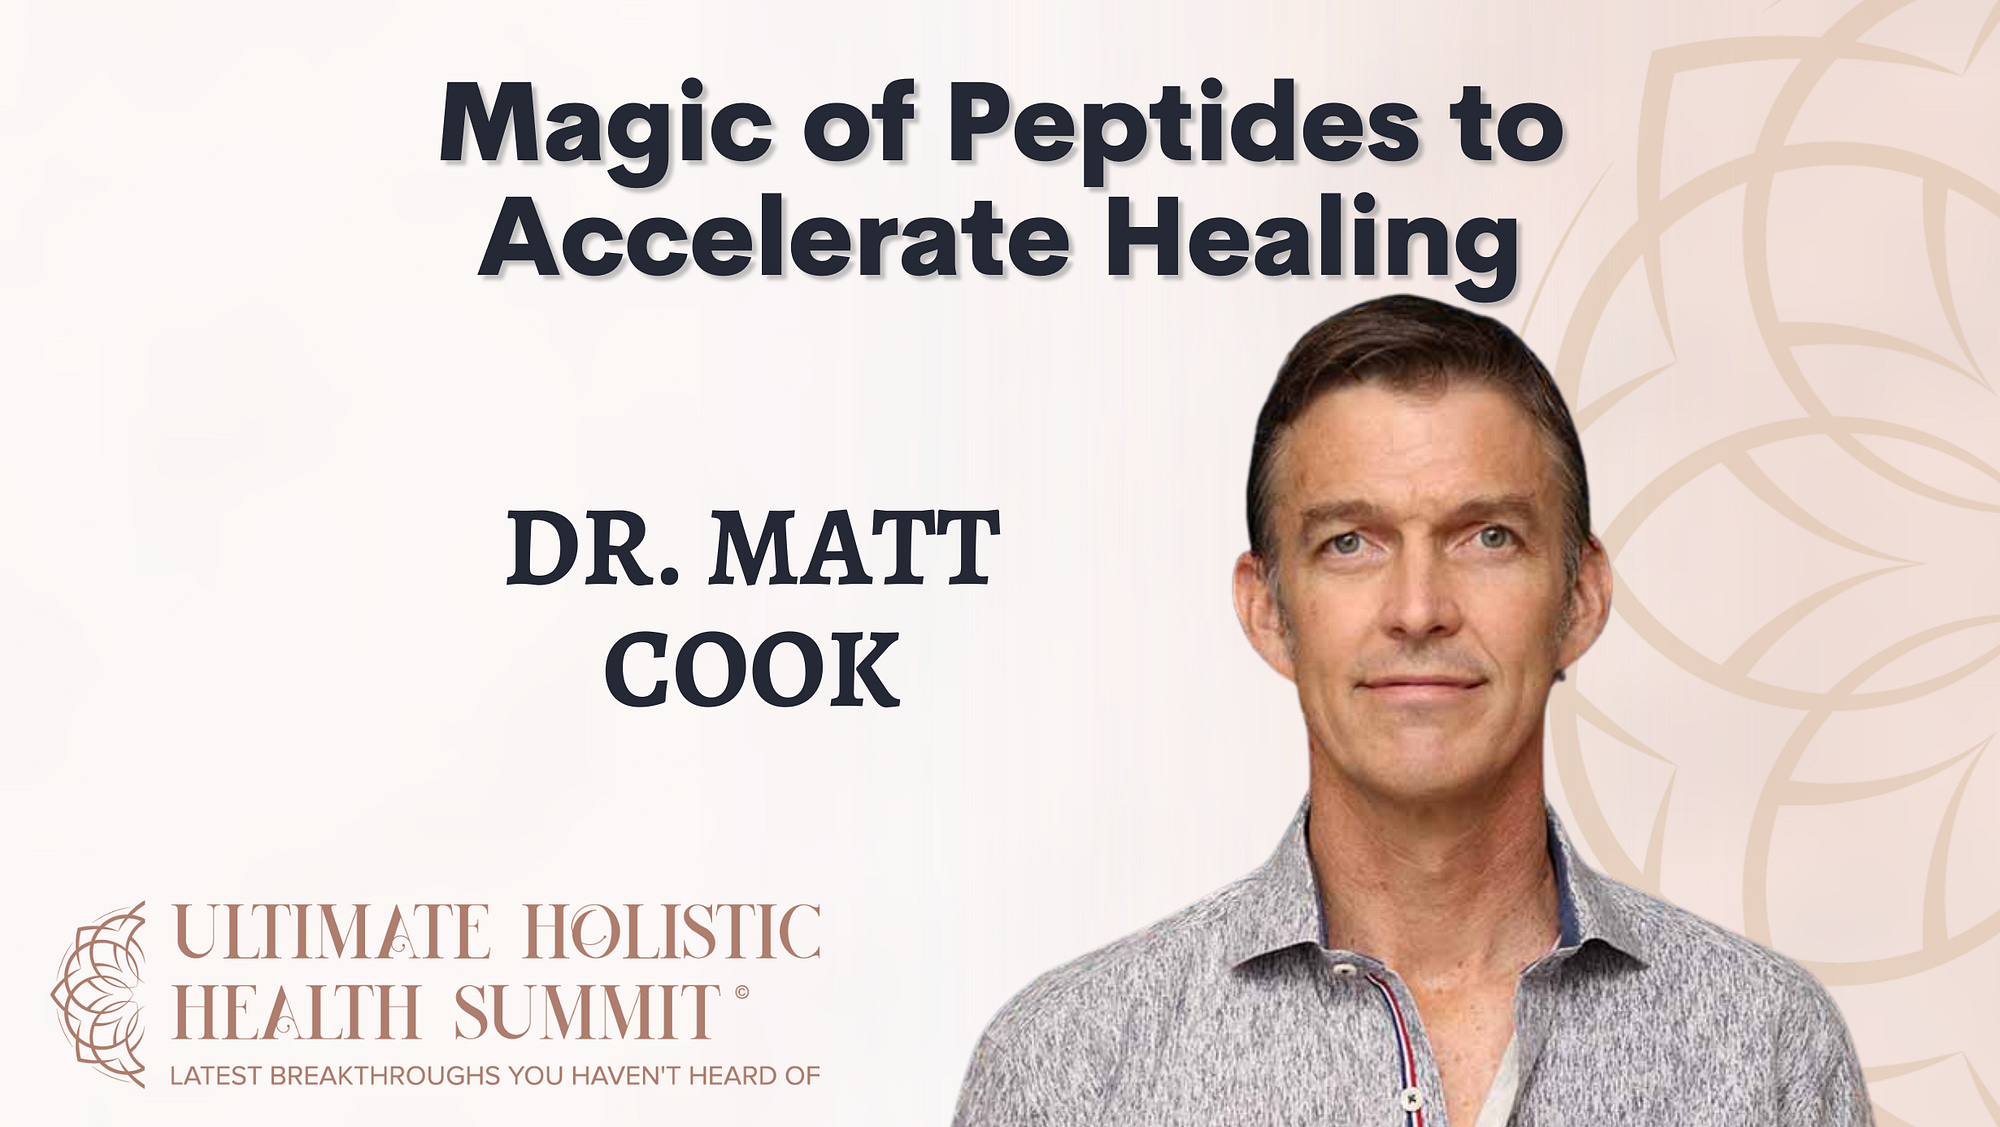 Magic of Peptides to Accelerate Healing